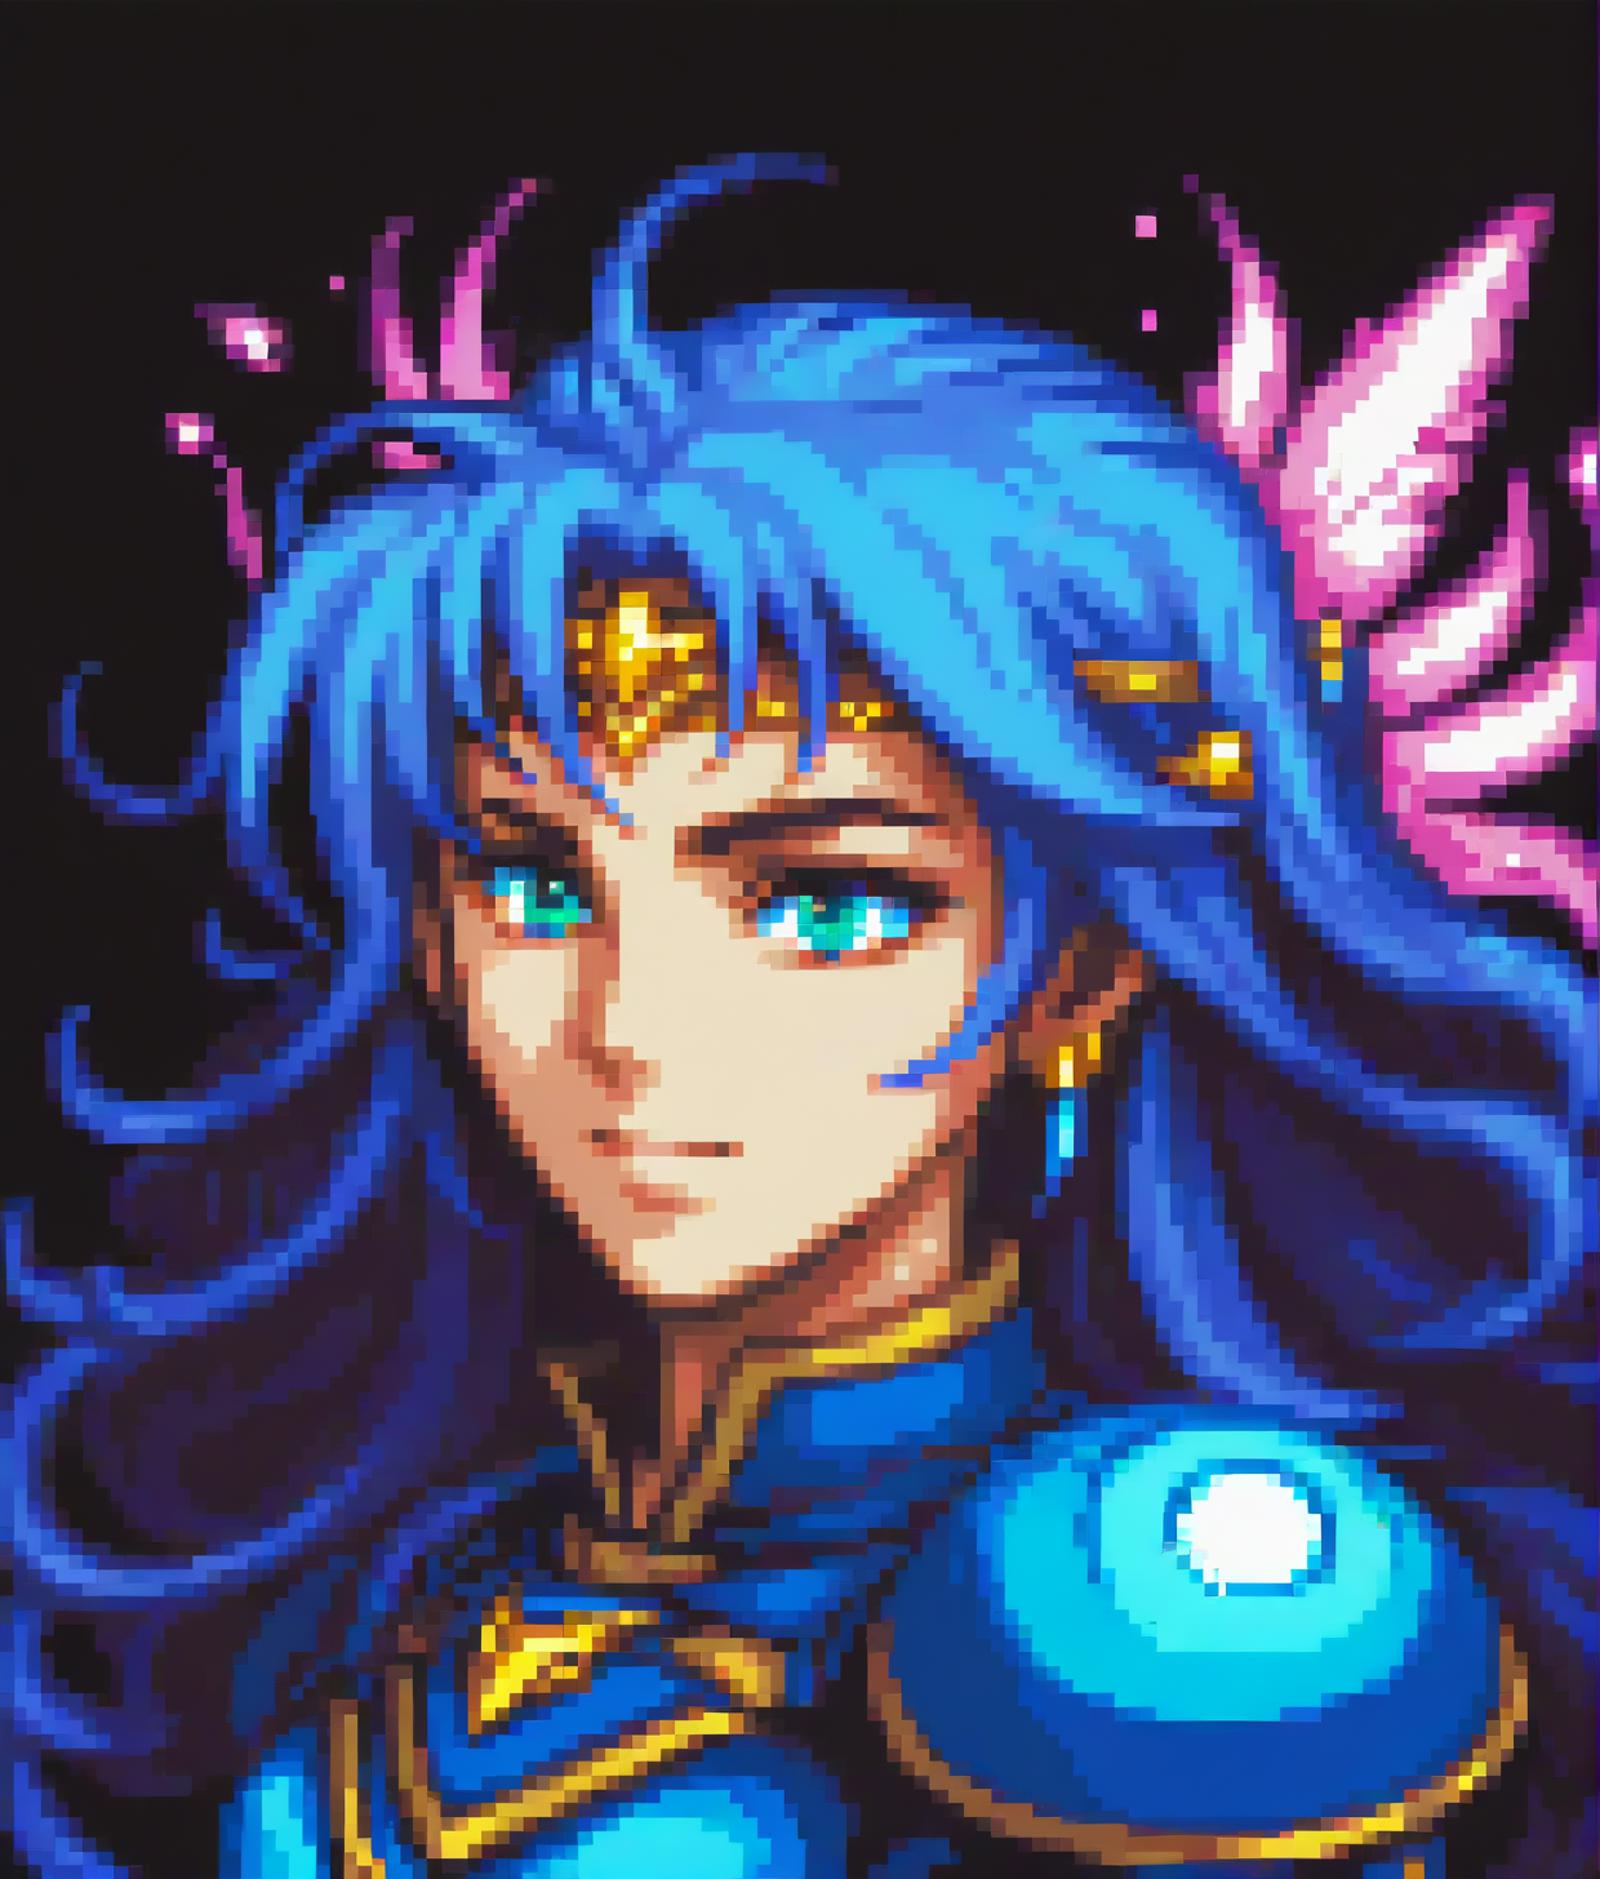 Pixel Style (& GBA Fire Emblem Portraits) image by deep_synth